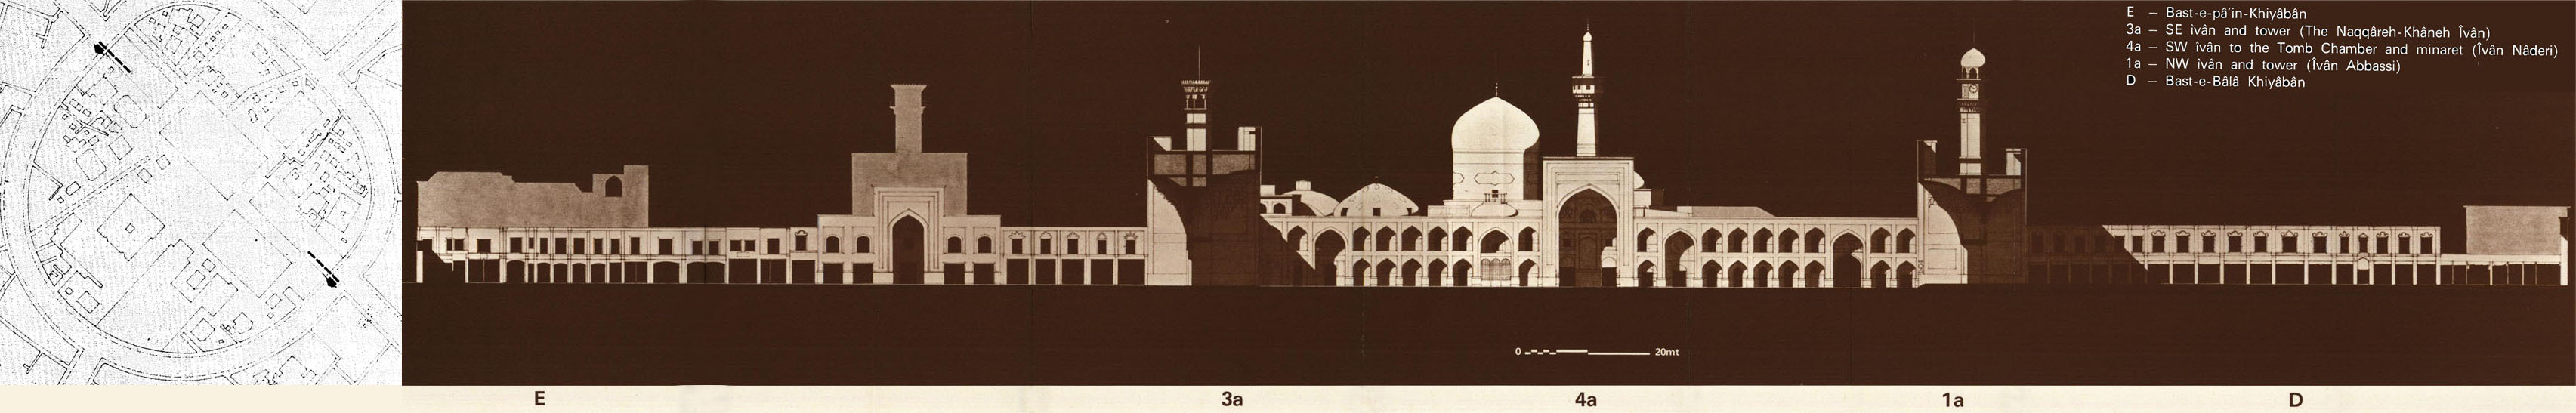 Longitudinal section, showing from left to right: Bast-e-Pa'in Khiyaban (E);  SE iwan and tower (or, Naqqare-Khane Iwan, 3a); SW iwan to the Tomb Chamber and minaret (or, Iwan Naderi, 4a); NW iwan and tower (or, Iwan Abbasi, 1a) and Bast-e-Bala Khiyaban (D)